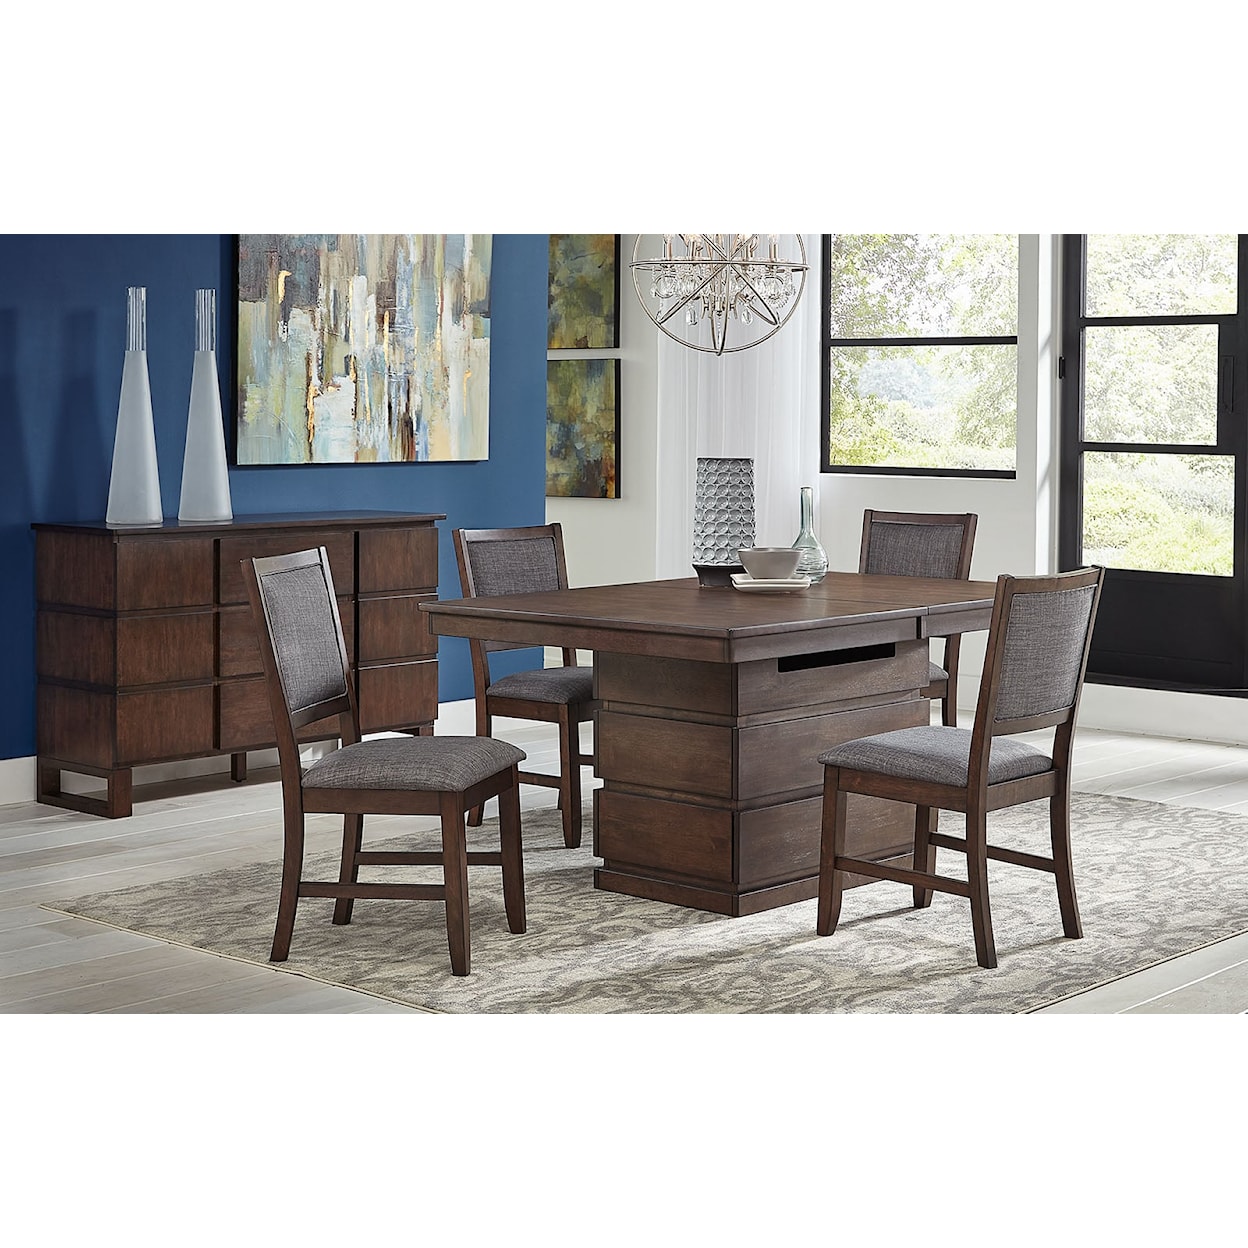 A-A Chesney Adjustable Dining Table